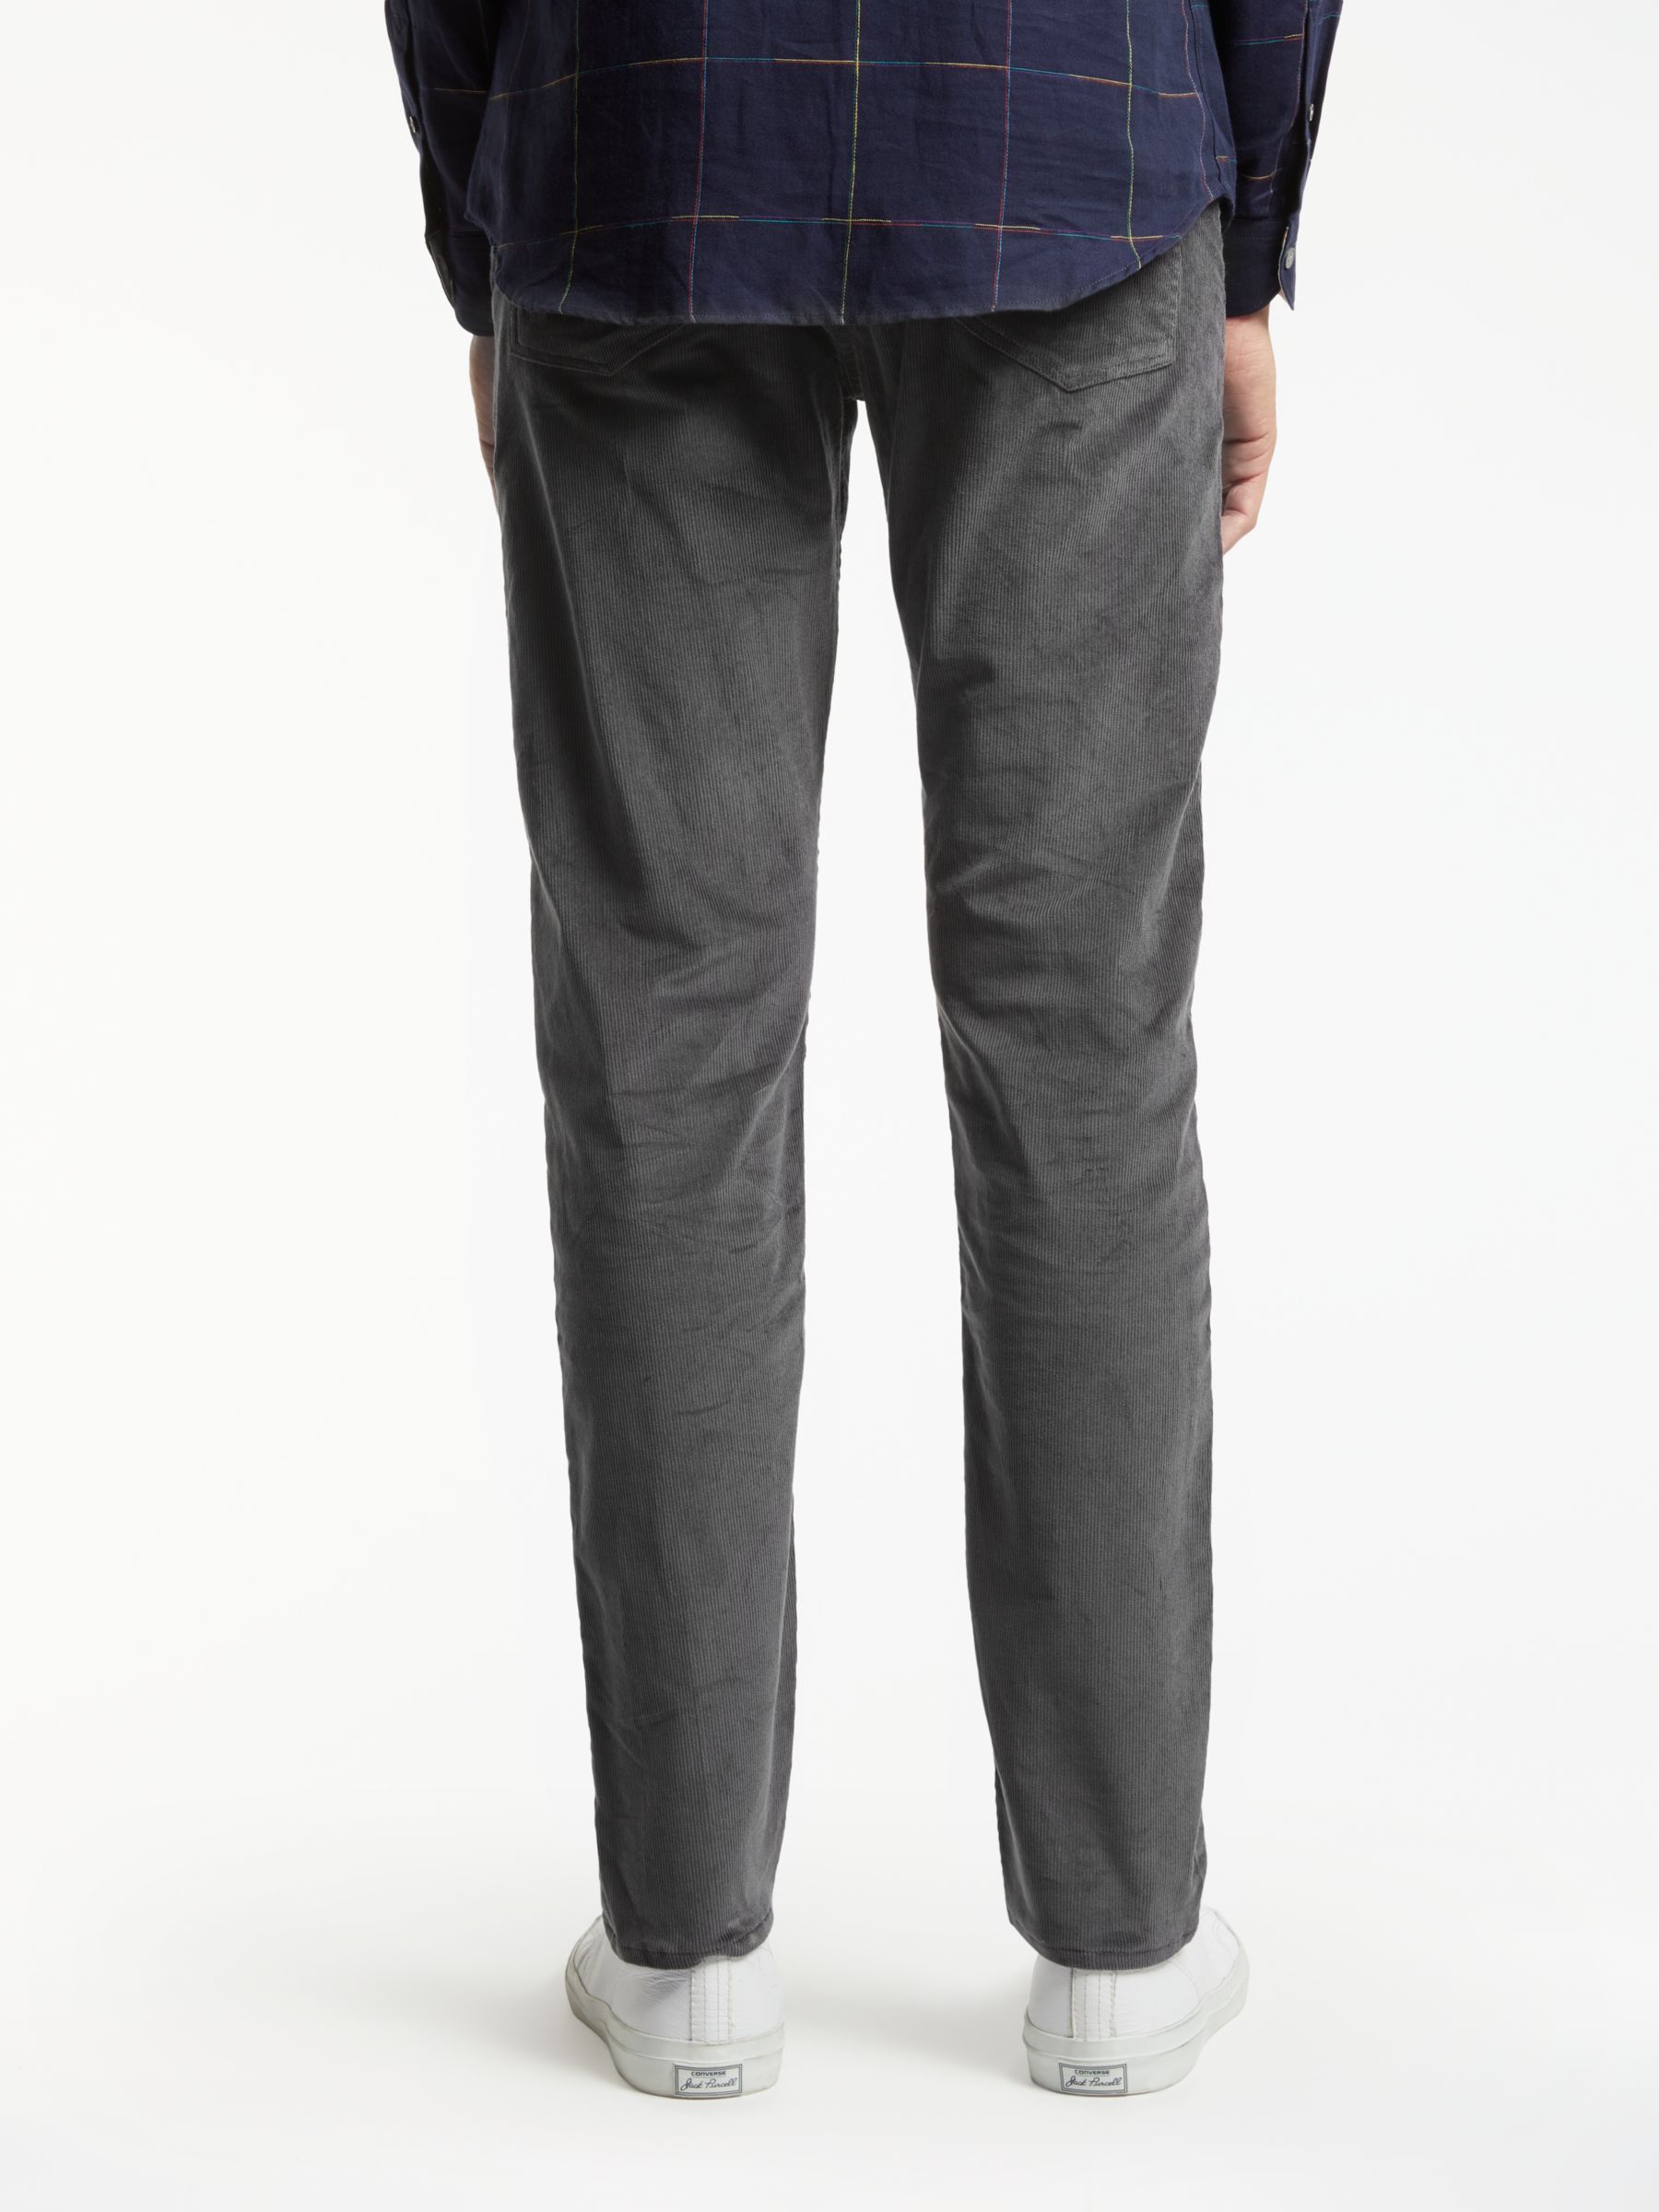 paul smith cords jeans